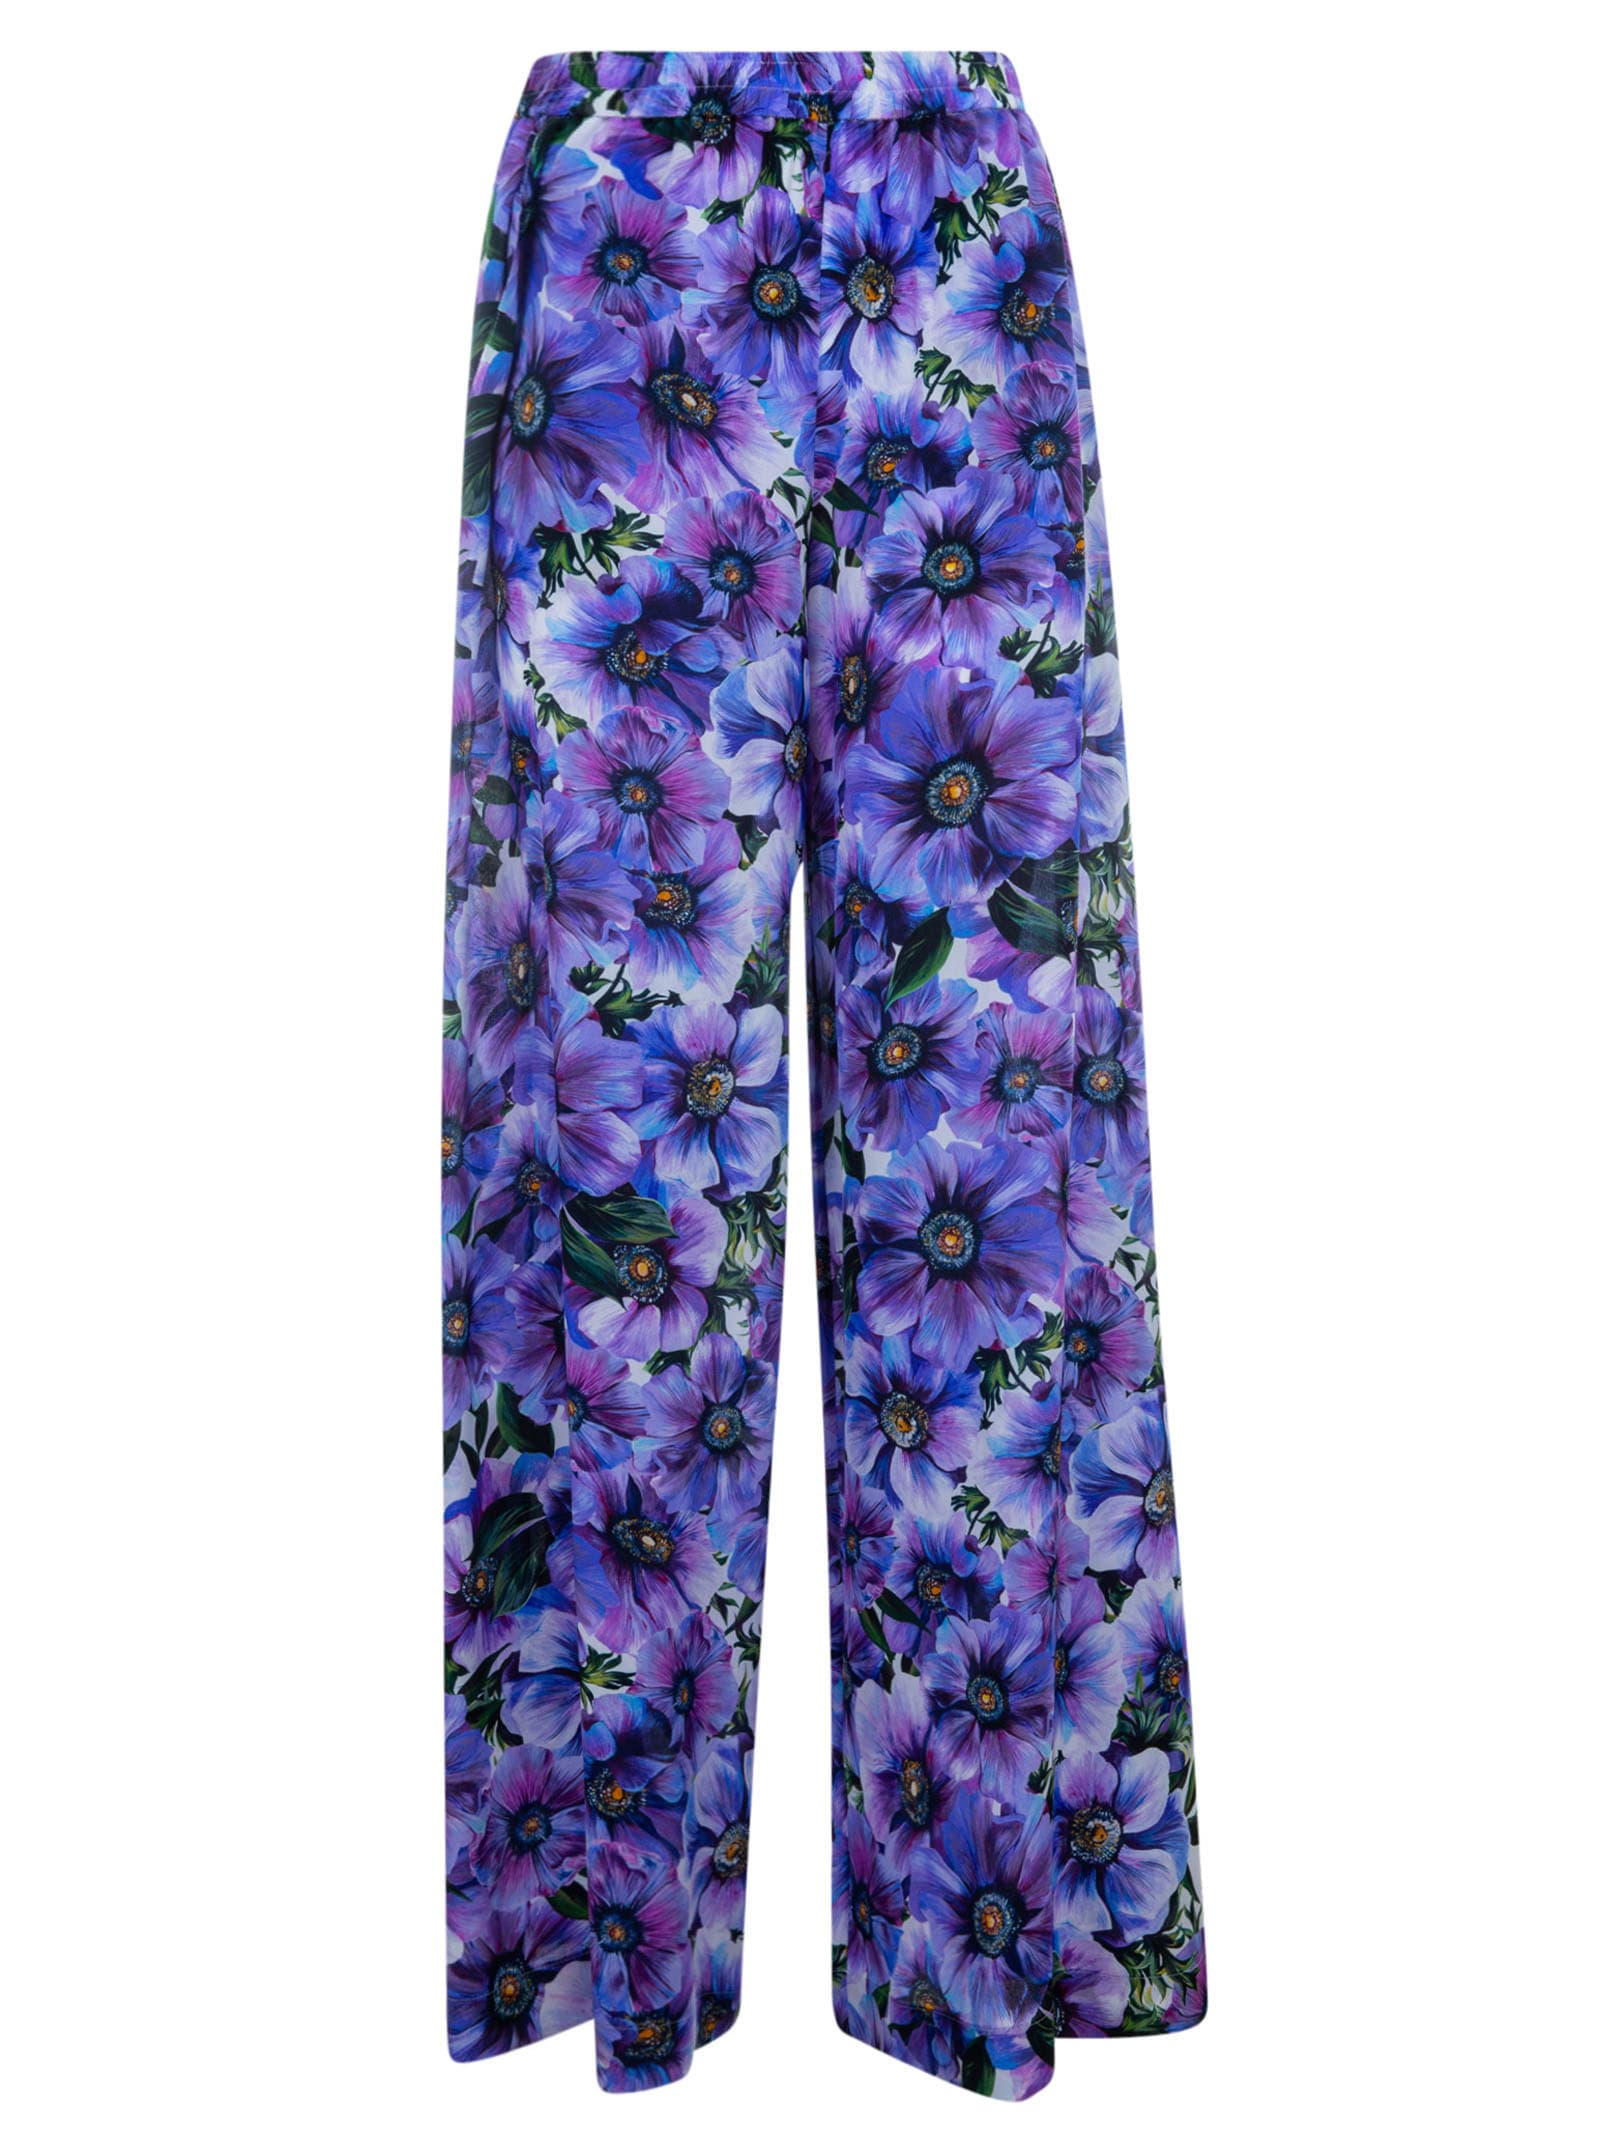 DOLCE & GABBANA ALL-OVER FLORAL PRINTED TROUSERS,11270453